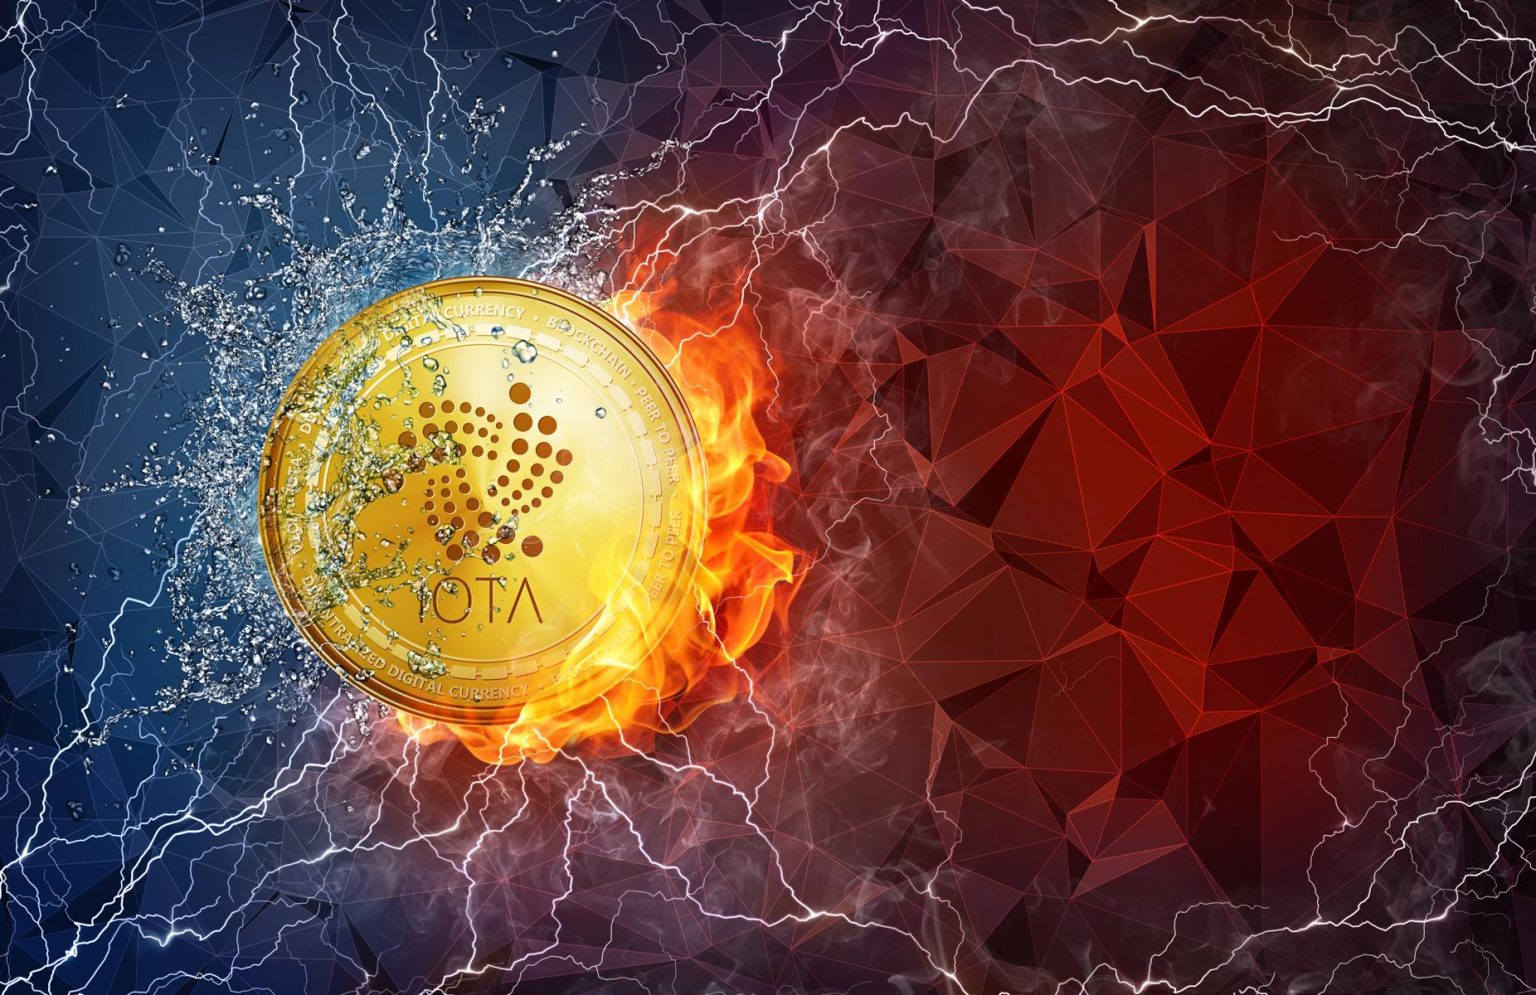 Gold-IOTA-Coin-with-blue-and-red-disruptive-background